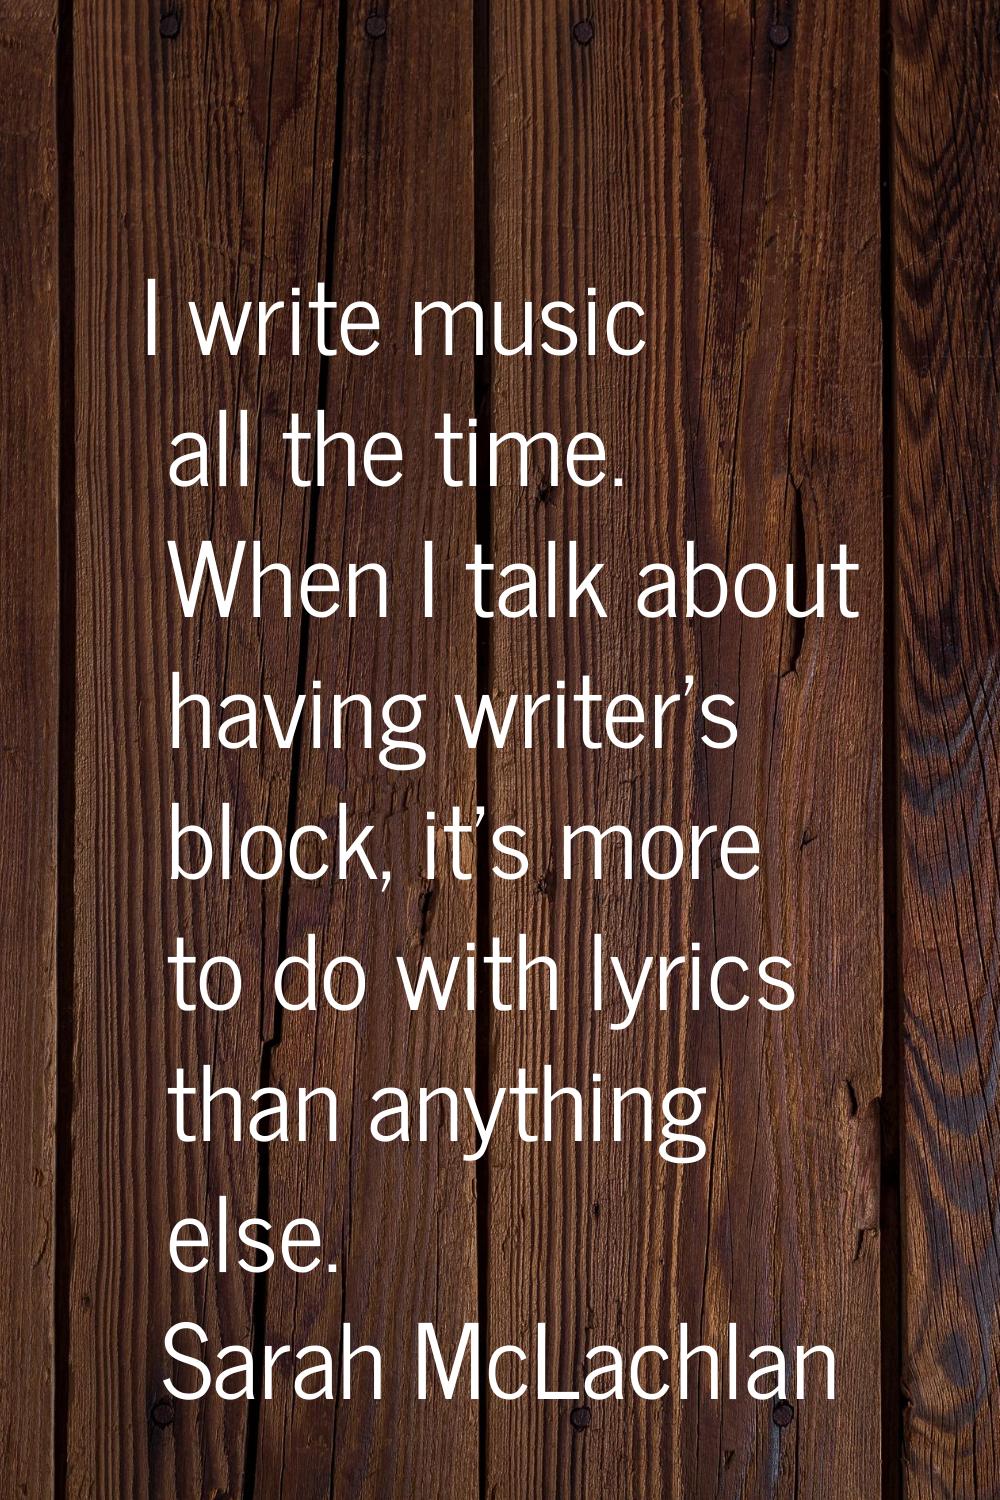 I write music all the time. When I talk about having writer's block, it's more to do with lyrics th